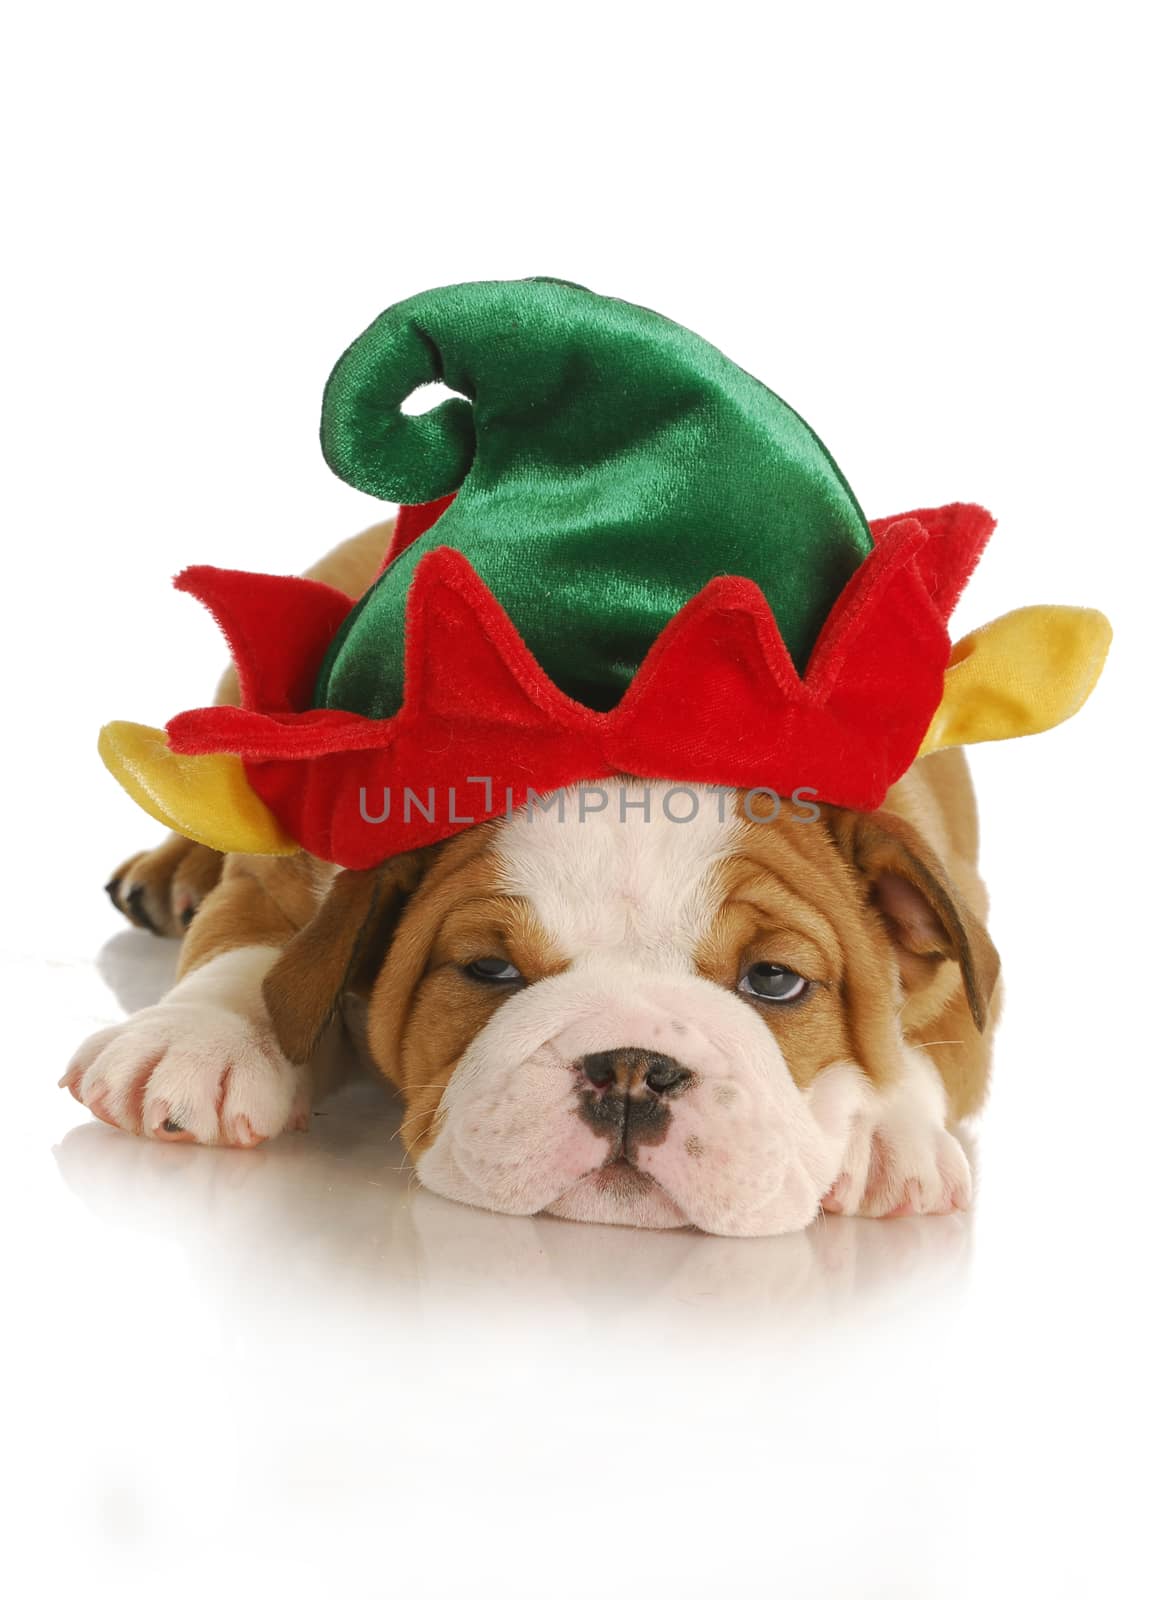 christmas puppy - english bulldog puppy dressed up like an elf on white background